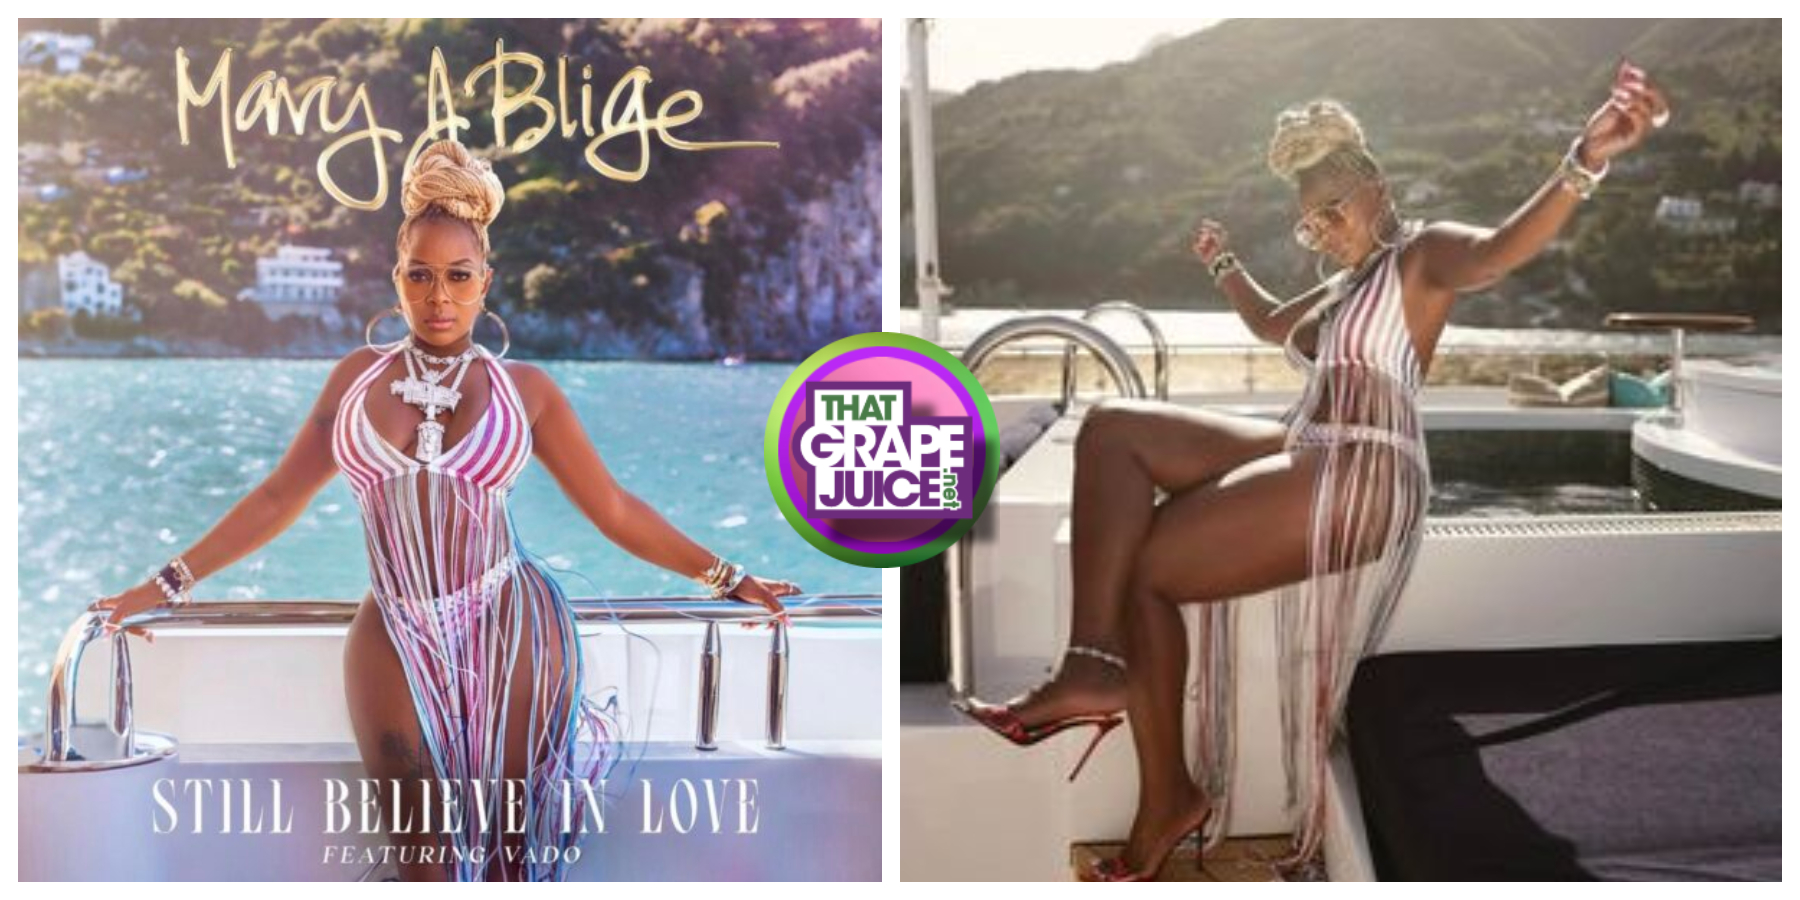 Mary J. Blige Extends All-Time Record As ‘Still Believe in Love’ Cracks Top 10 of Billboard’s R&B Chart